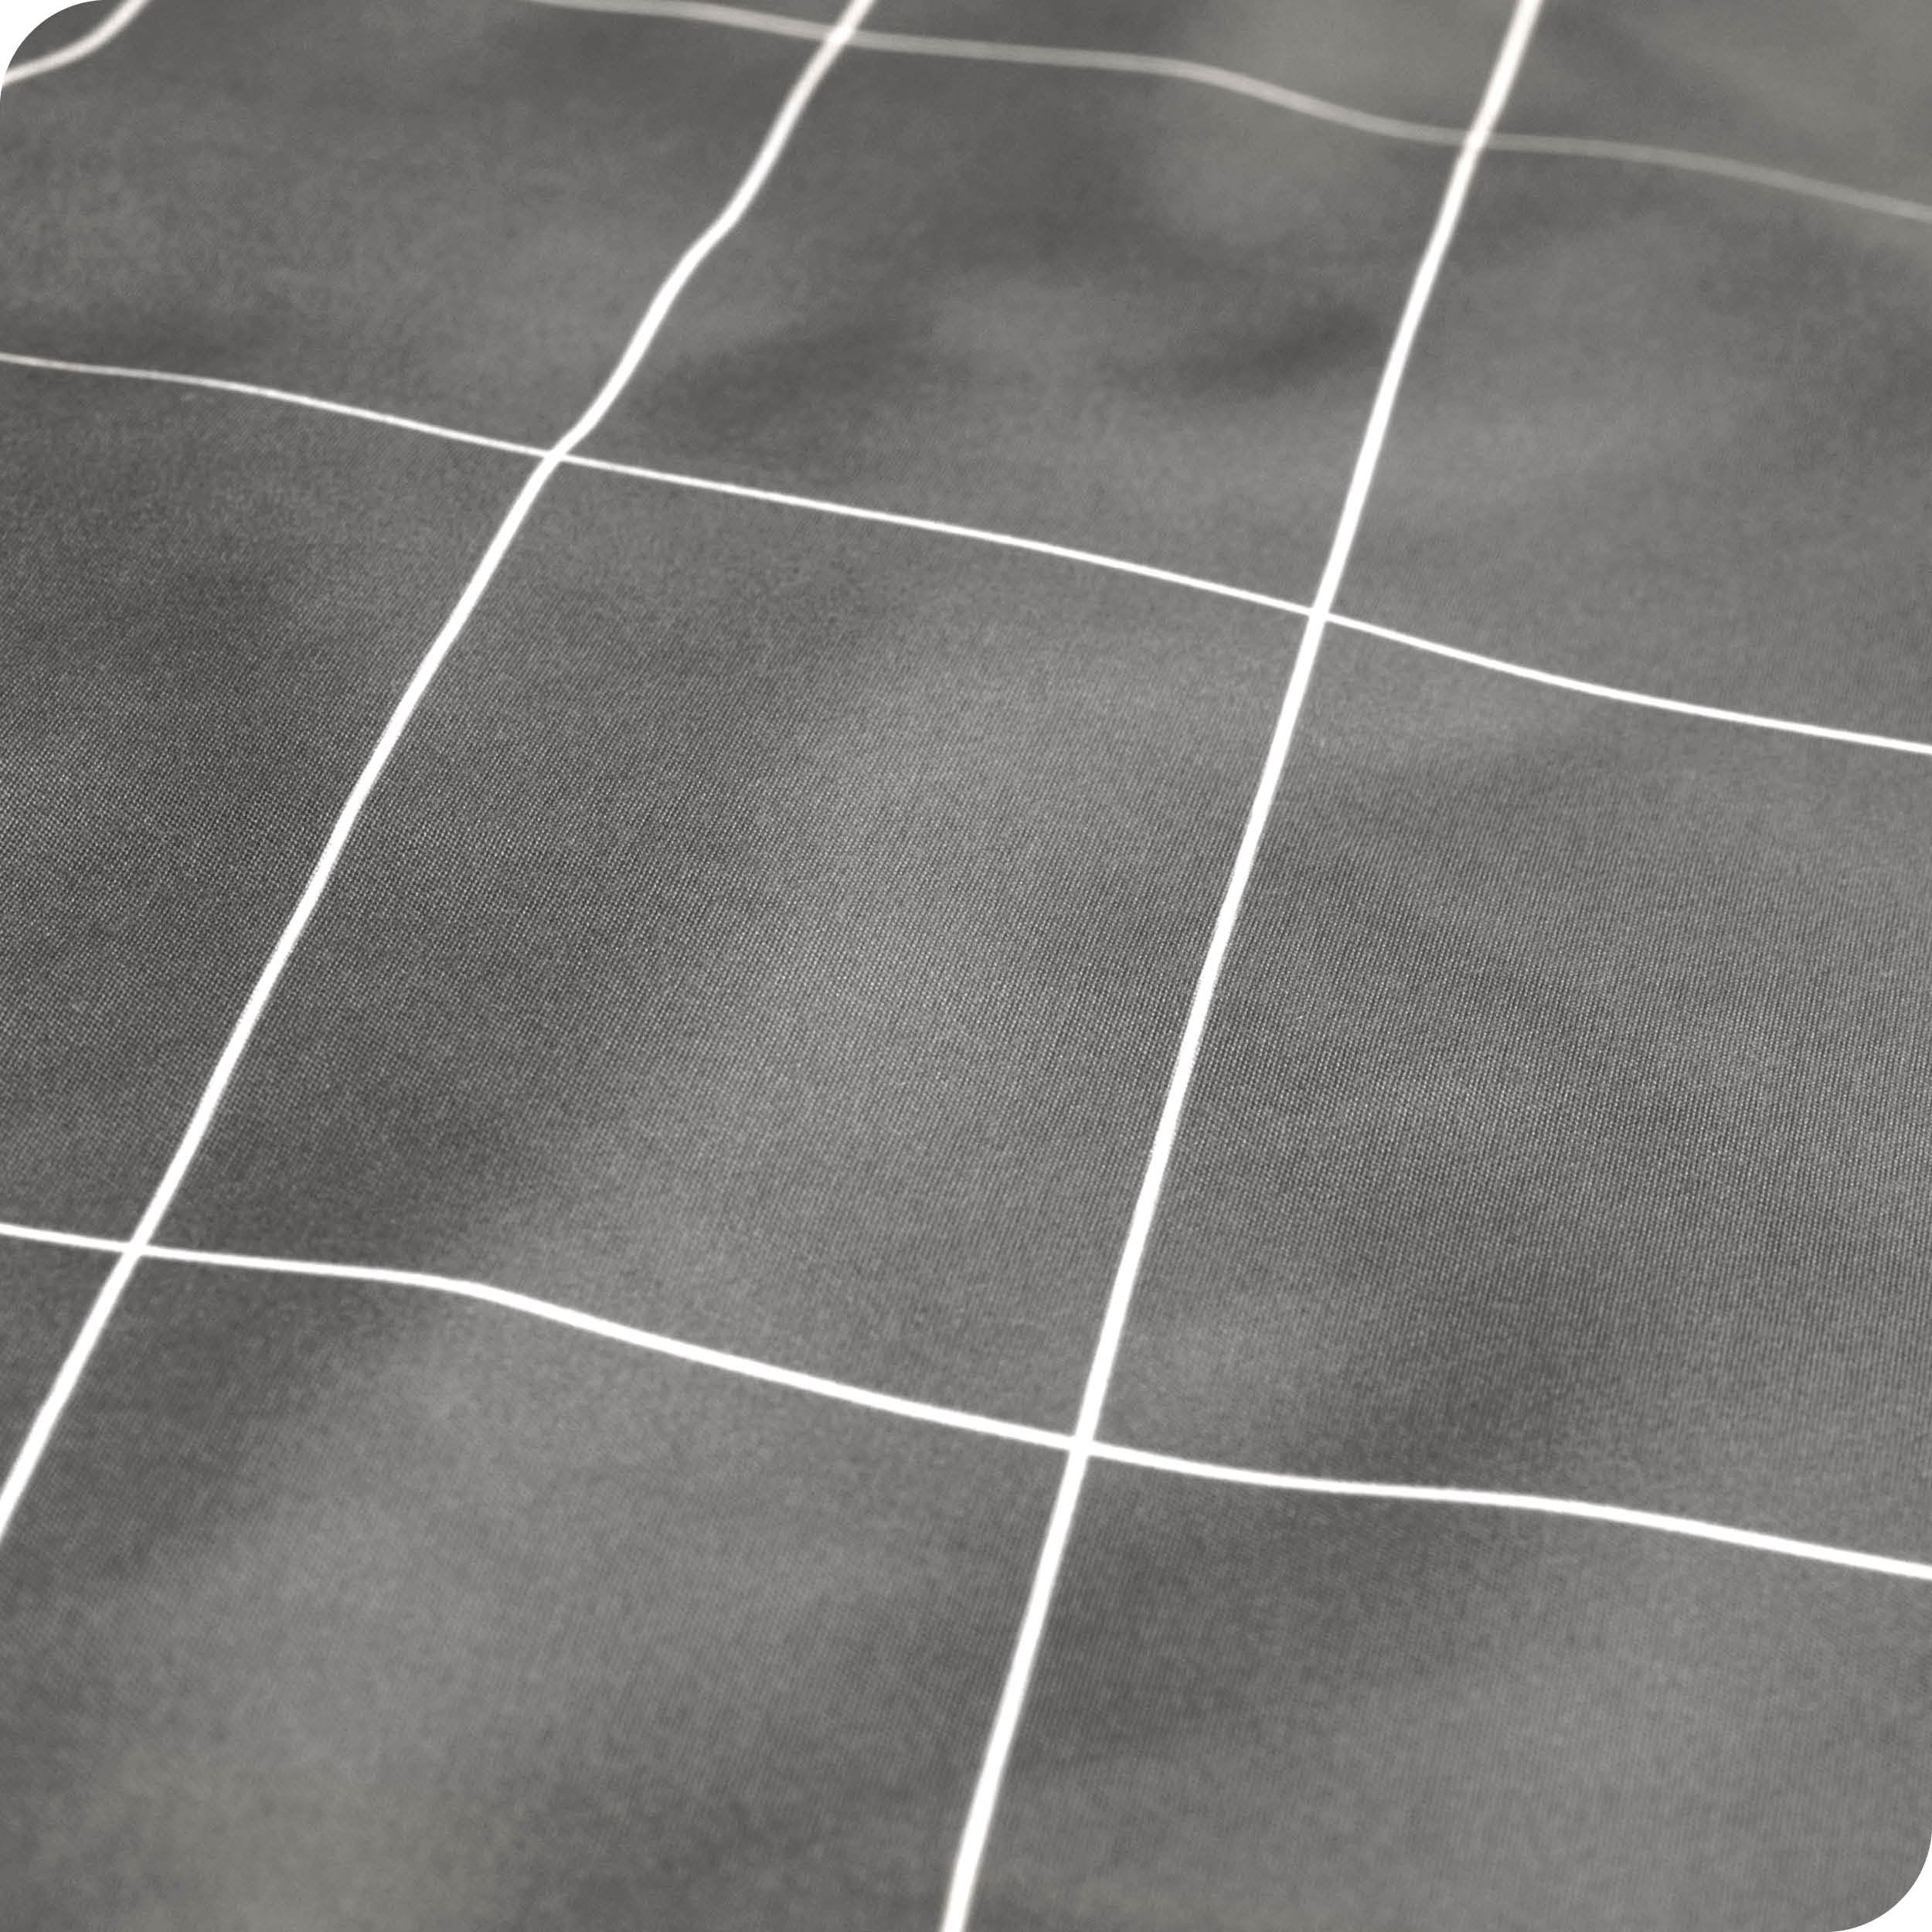 Close up of a printed microfiber sheet showing the grid pattern and texture